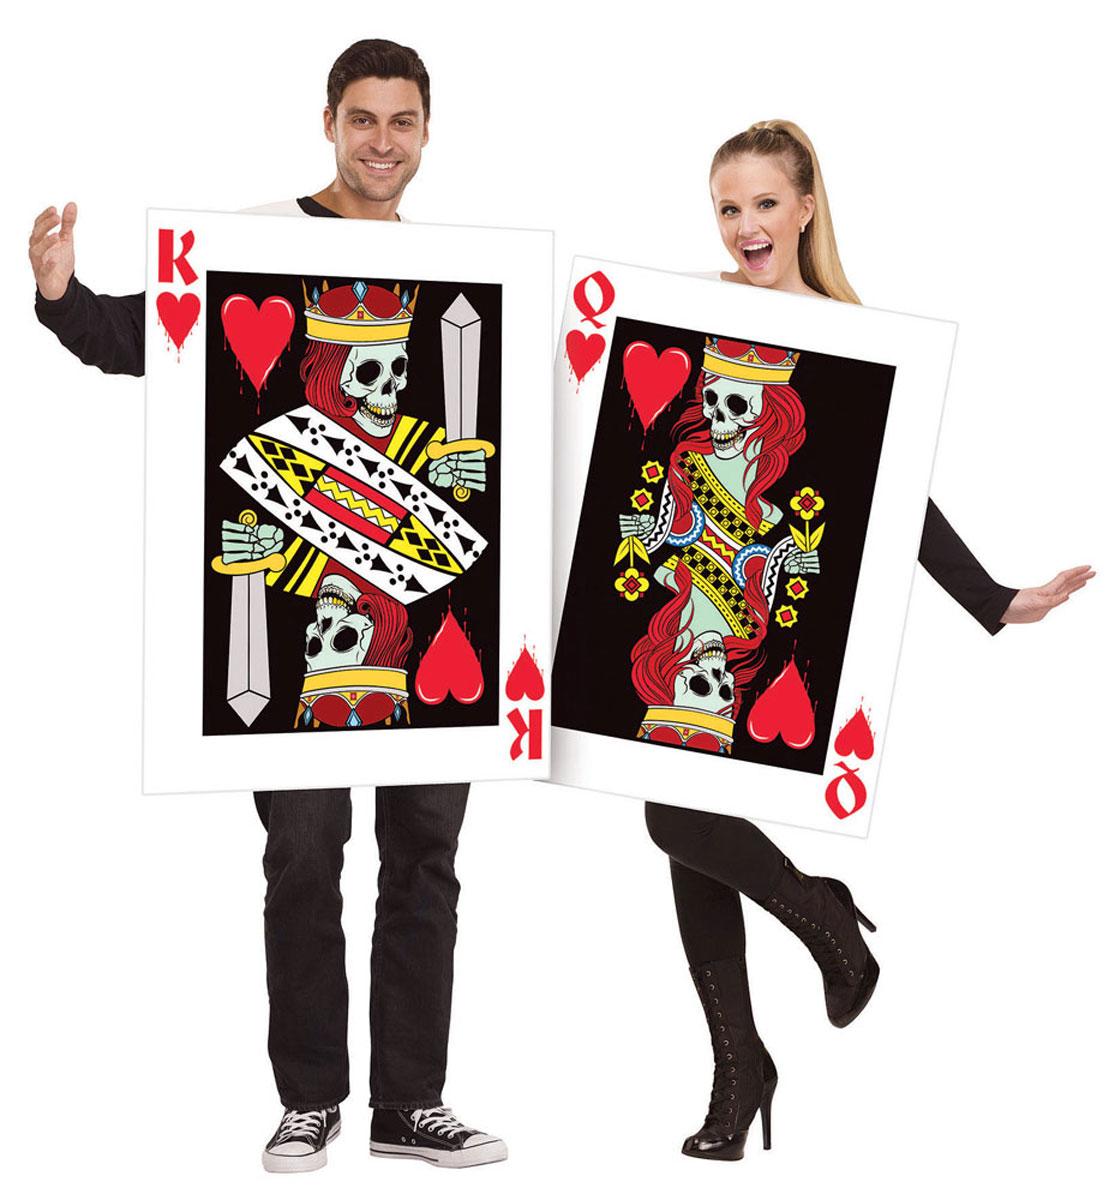 King and Queen of Hearts Couples Costumes by Fun-World 131814 available in the UK here at Karnival Costumes online party shop